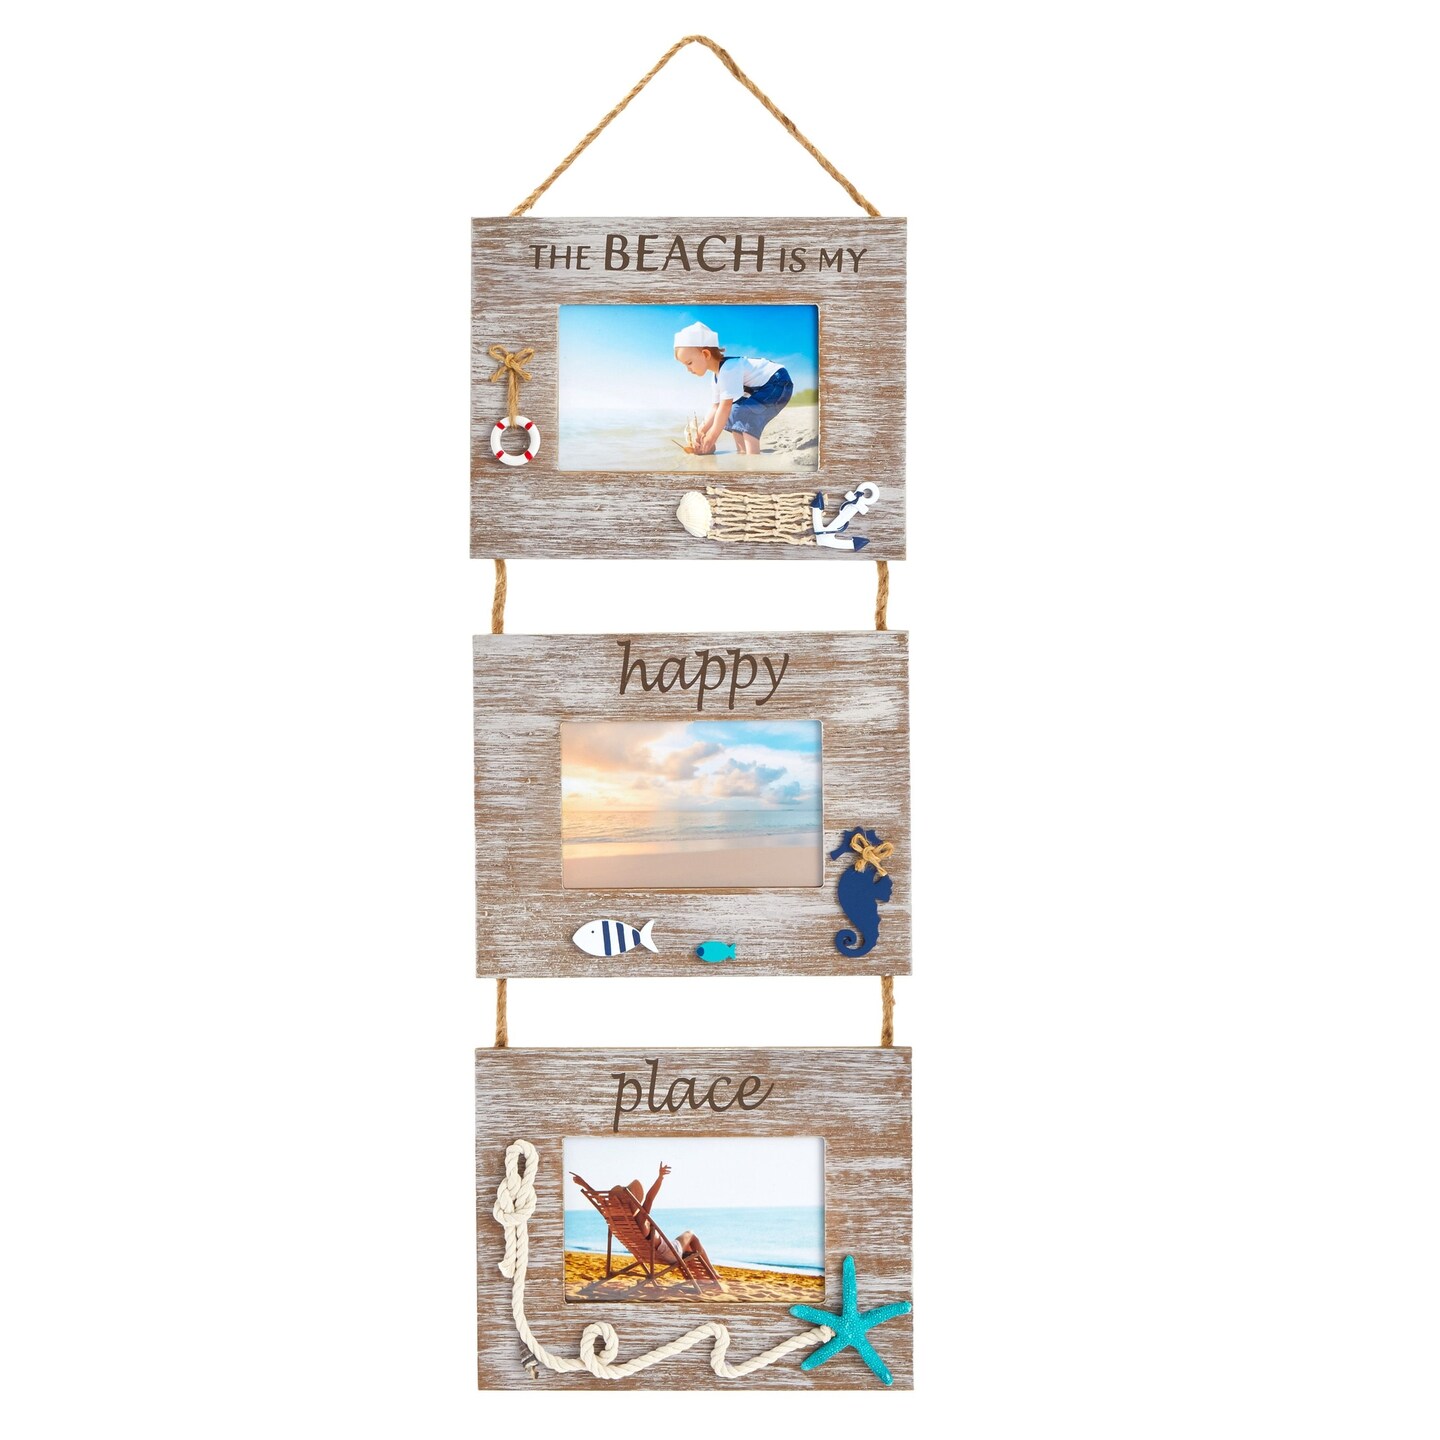 Hanging Beach Picture Frames for 4x6 Photos, Rustic Nautical Home Decor (9 x 30 x 0.25 In)